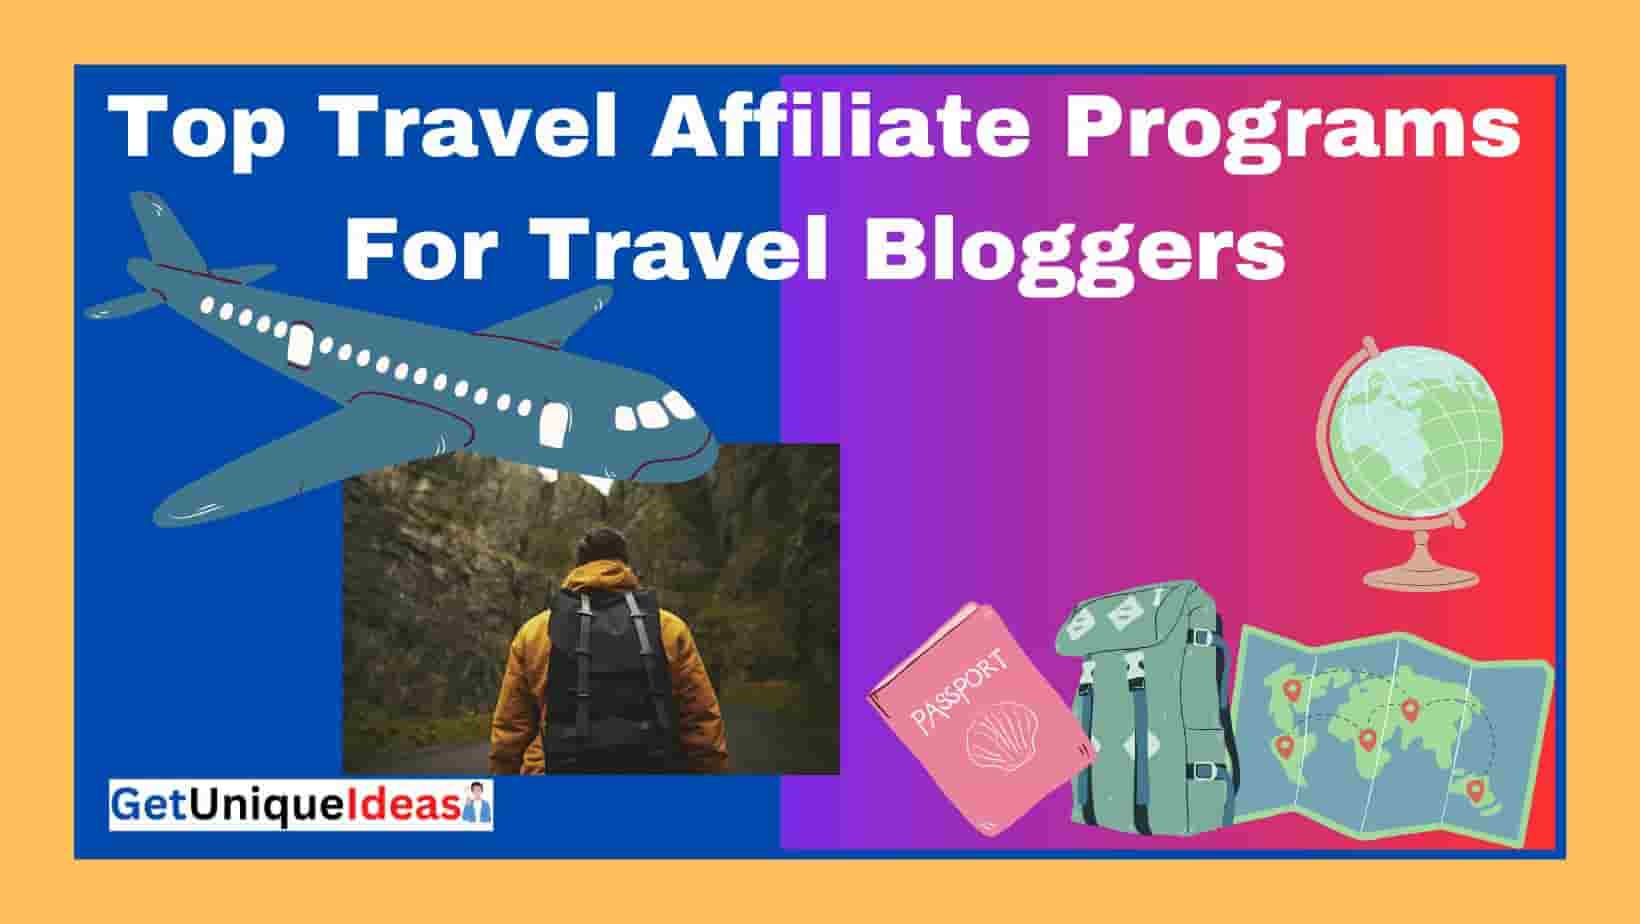 Top Travel Affiliate Programs For Travel Bloggers